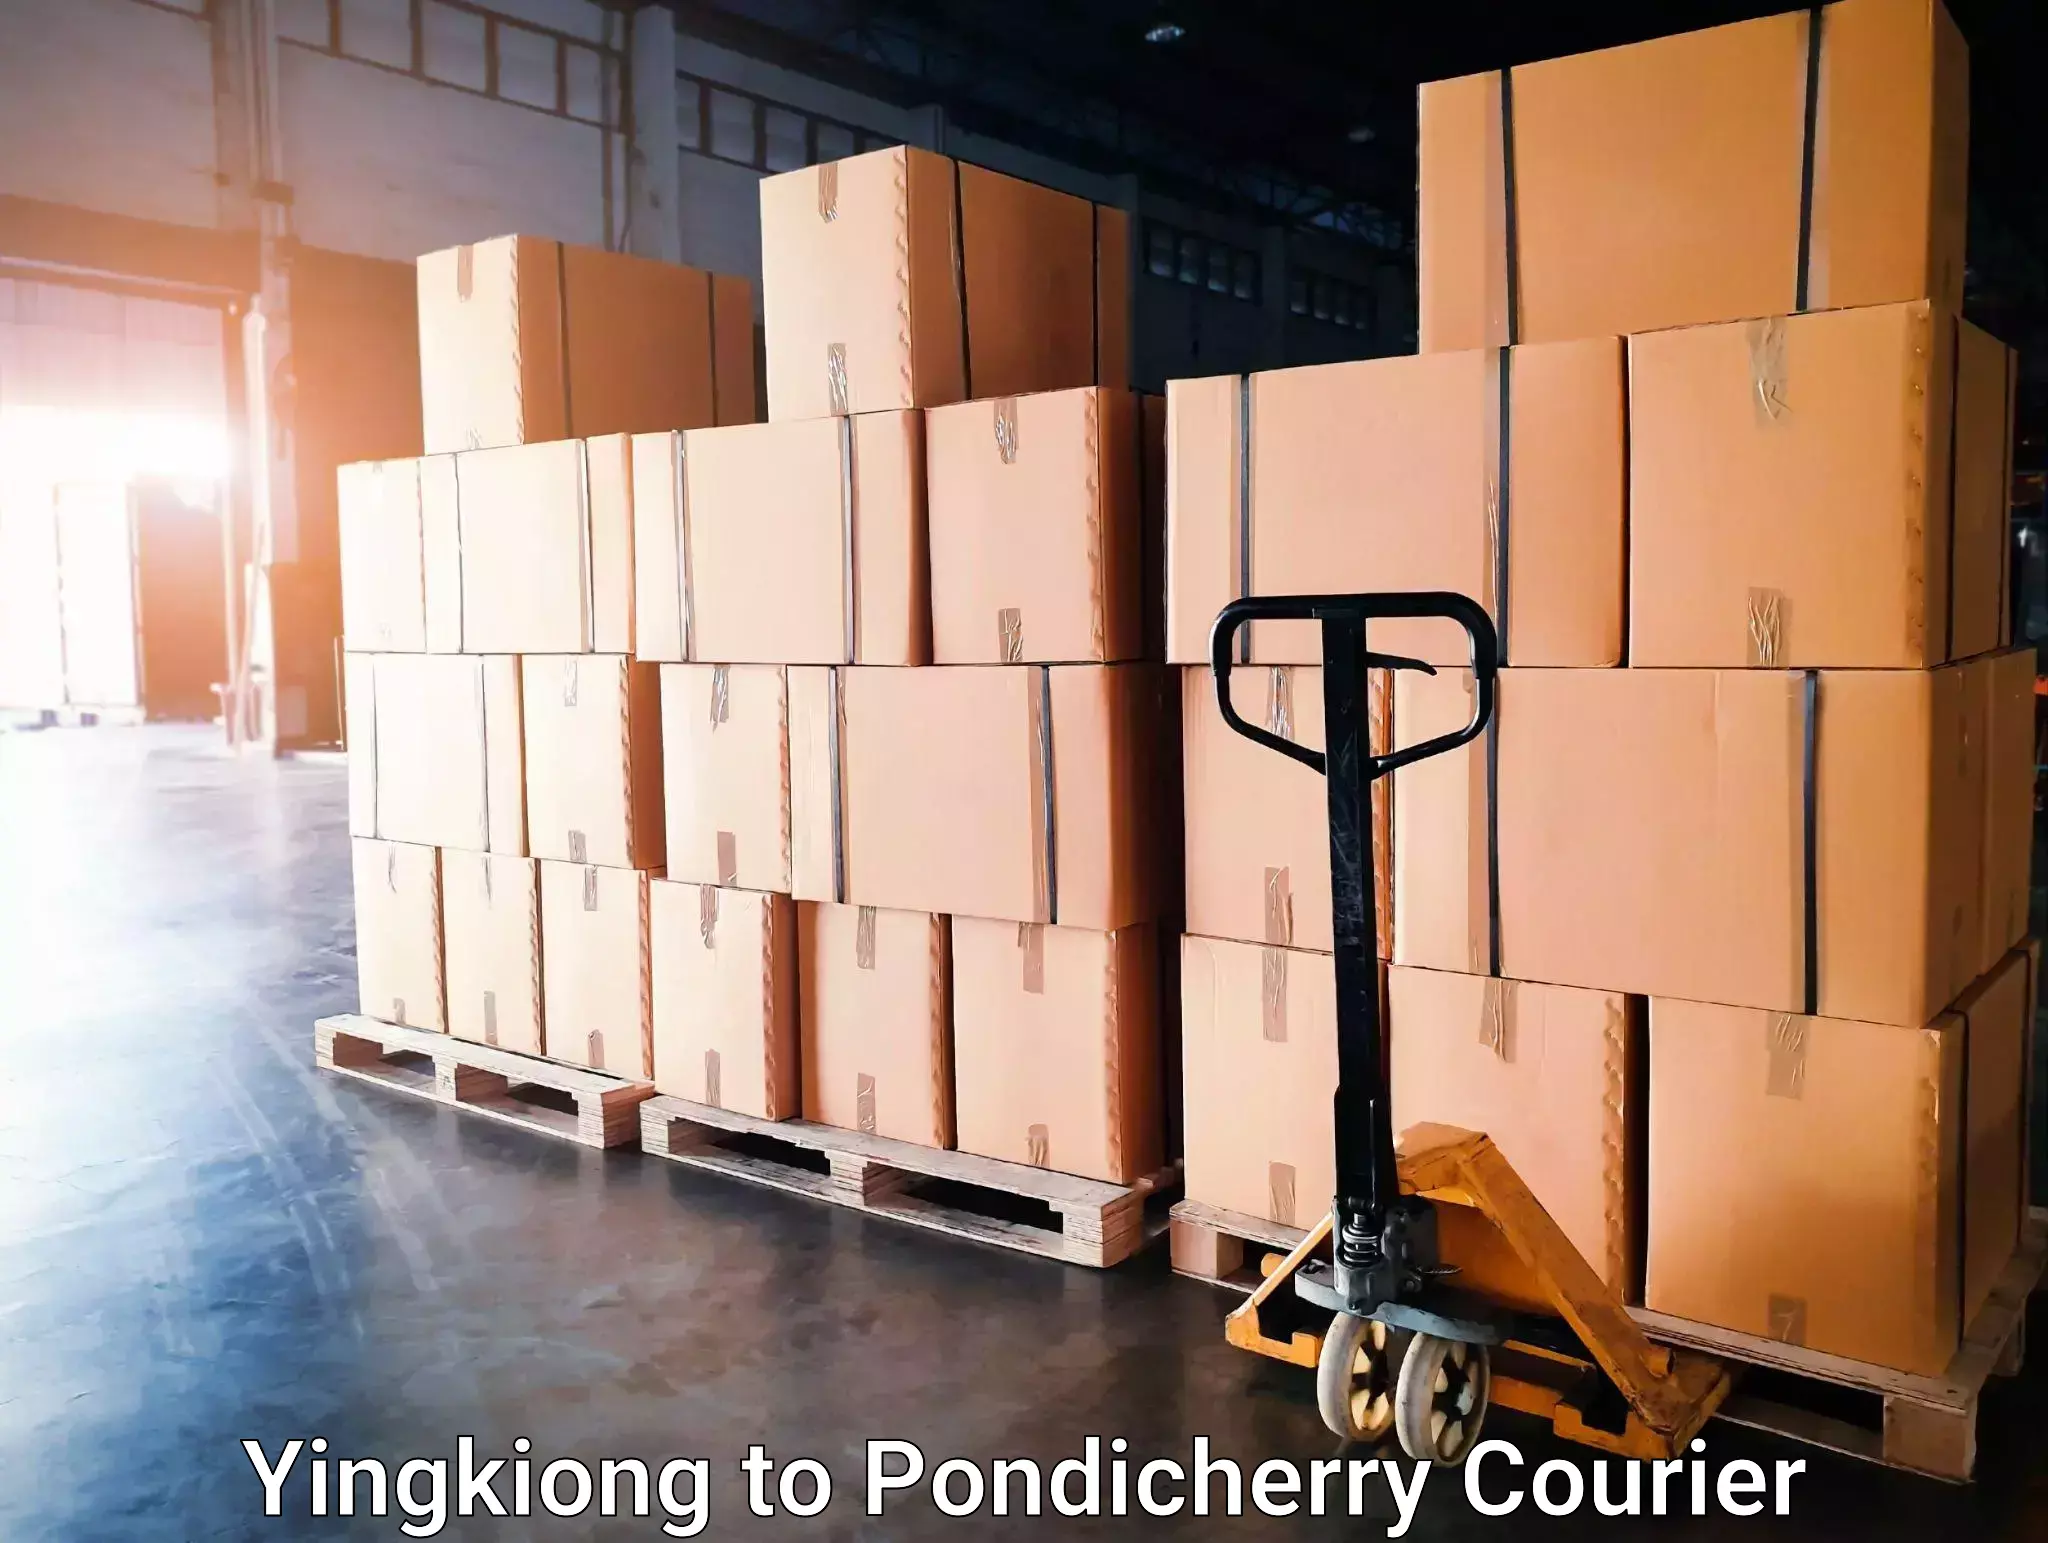 Doorstep delivery service Yingkiong to Pondicherry